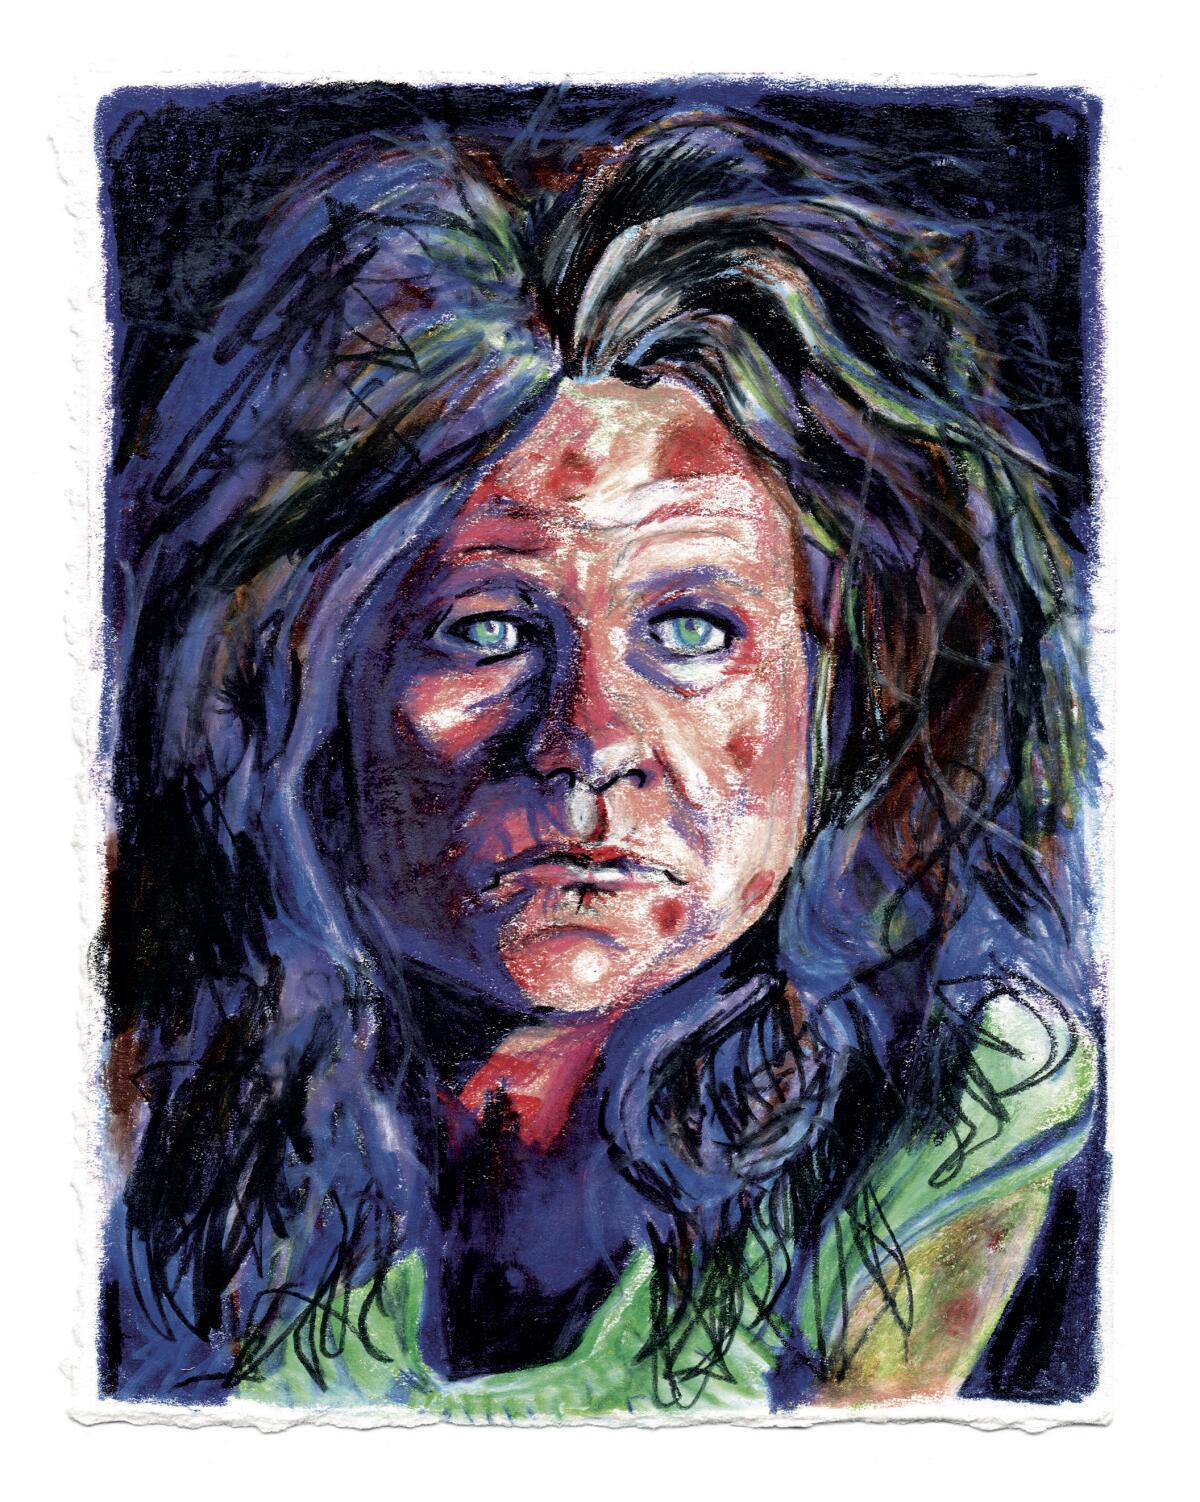 A colored pencil drawing of a haggard woman.